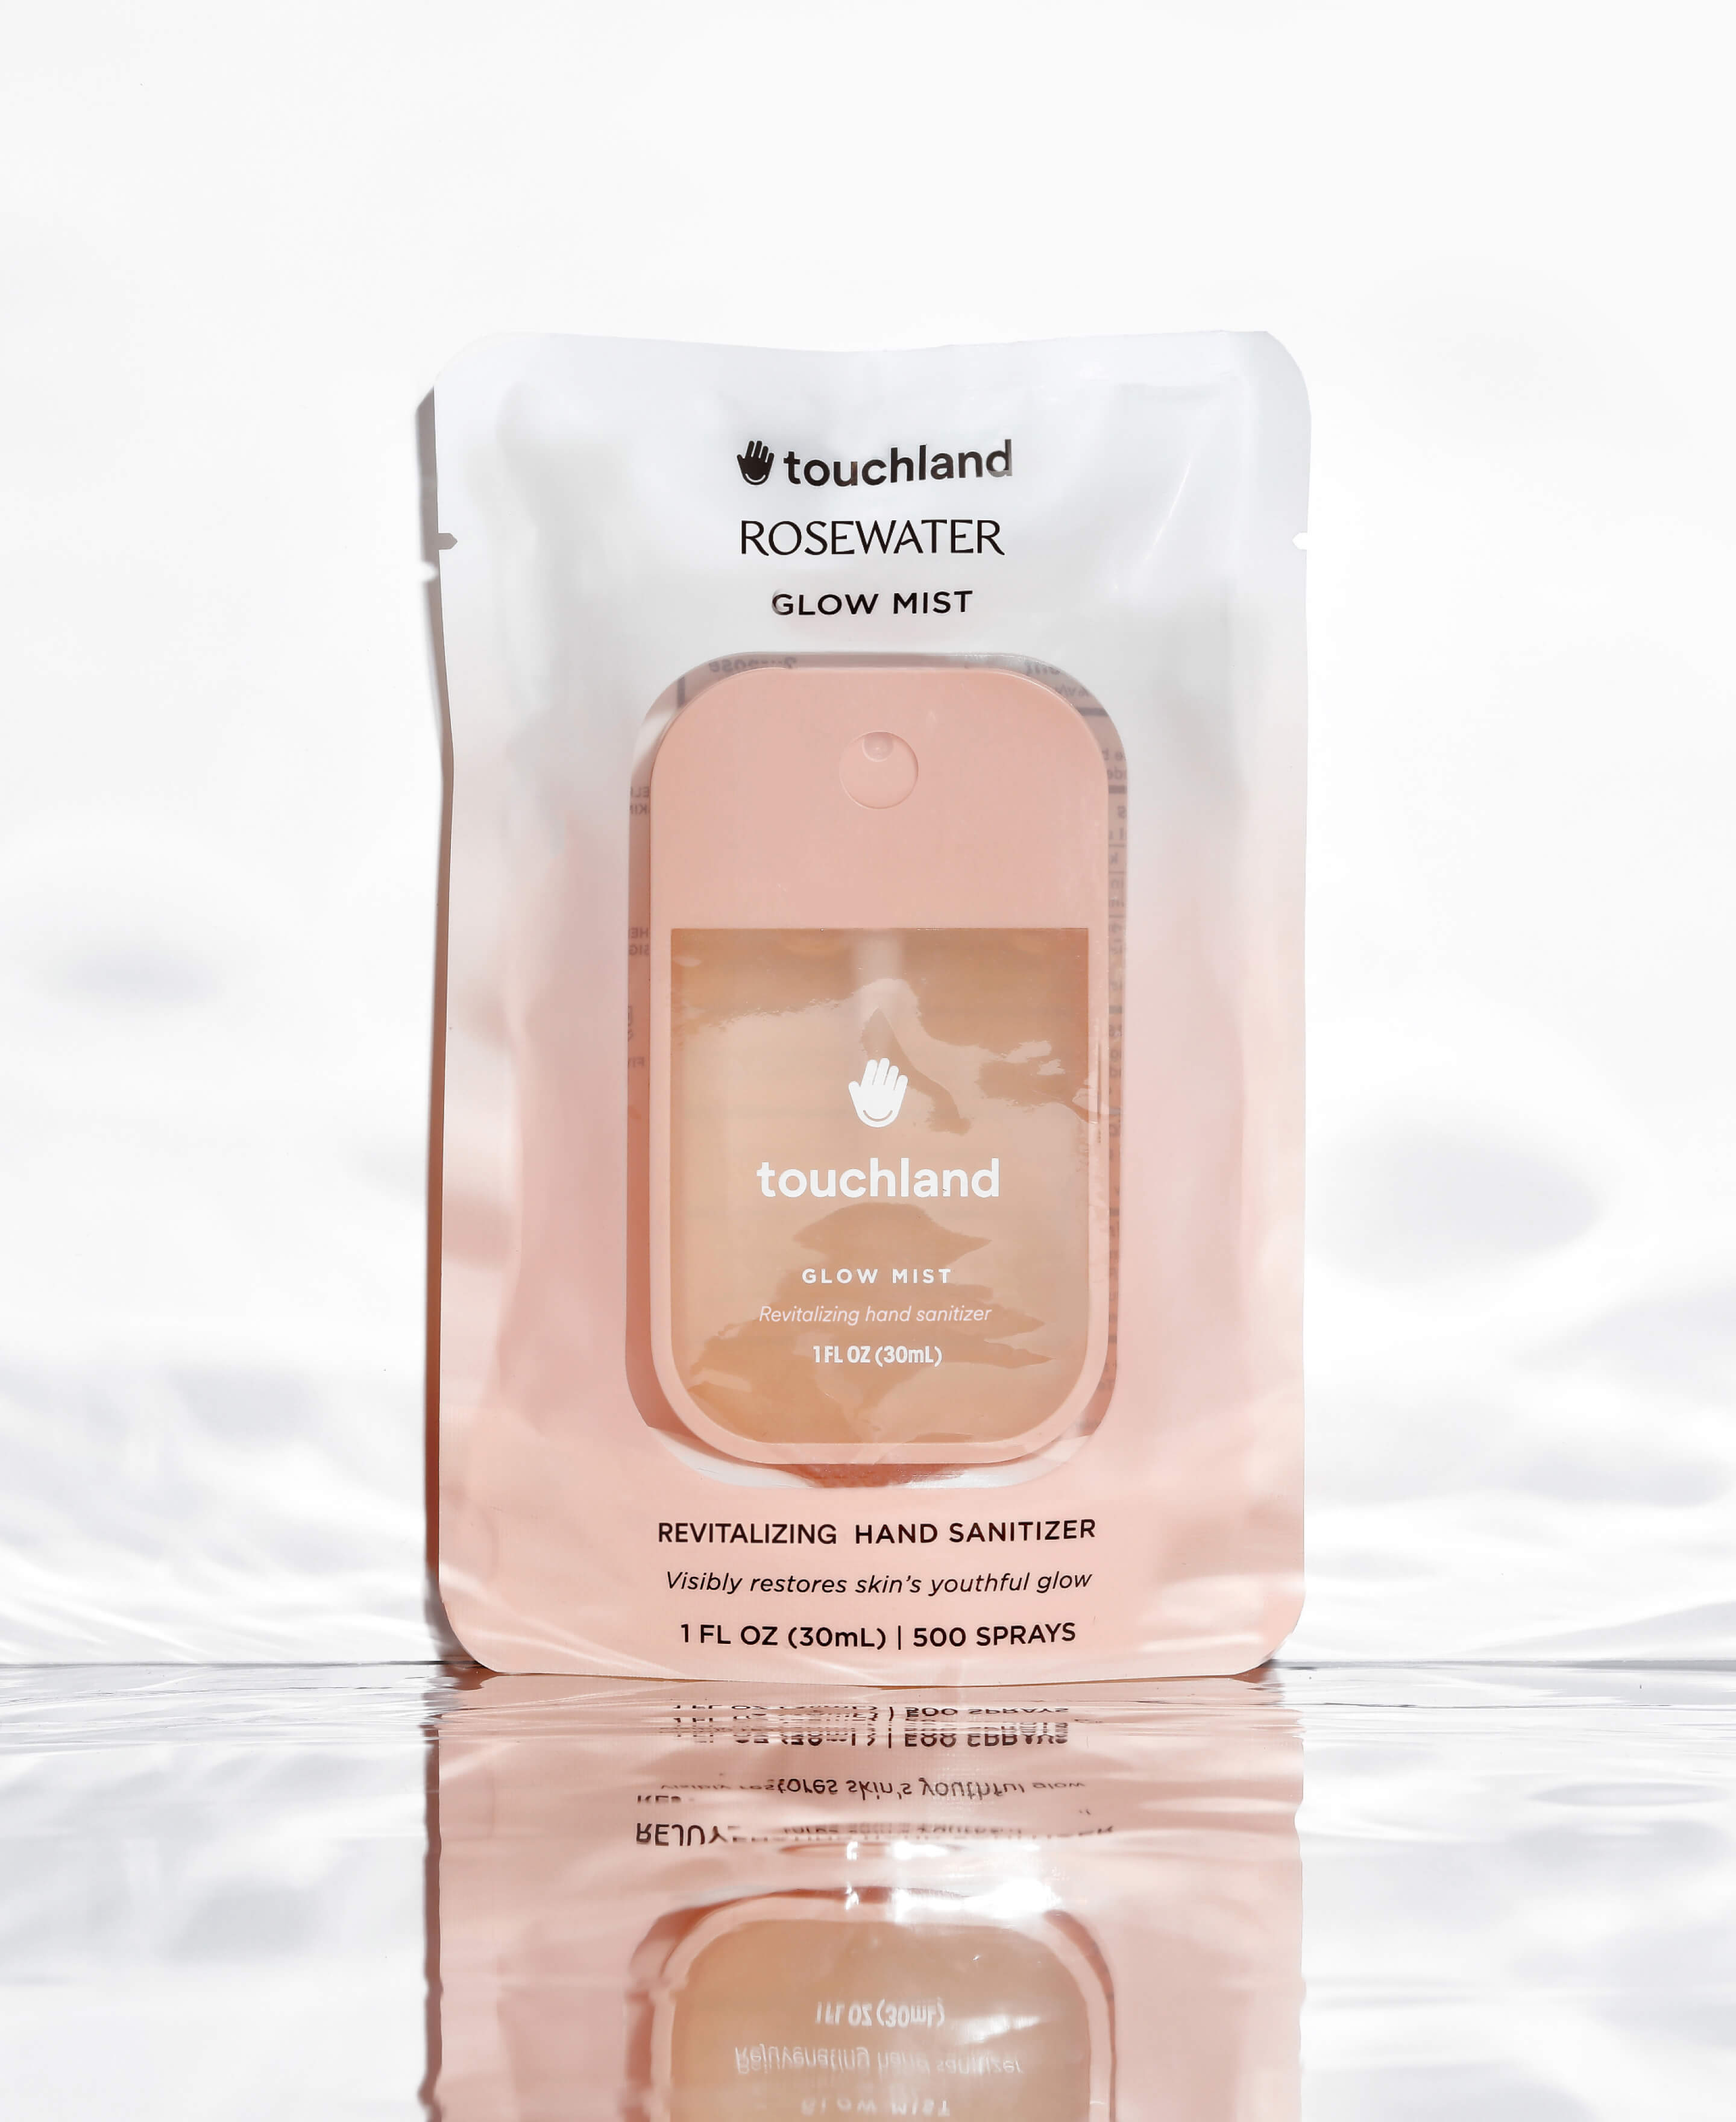 Glow Mist Rosewater Revitalizing Hand Sanitizer in packaging.